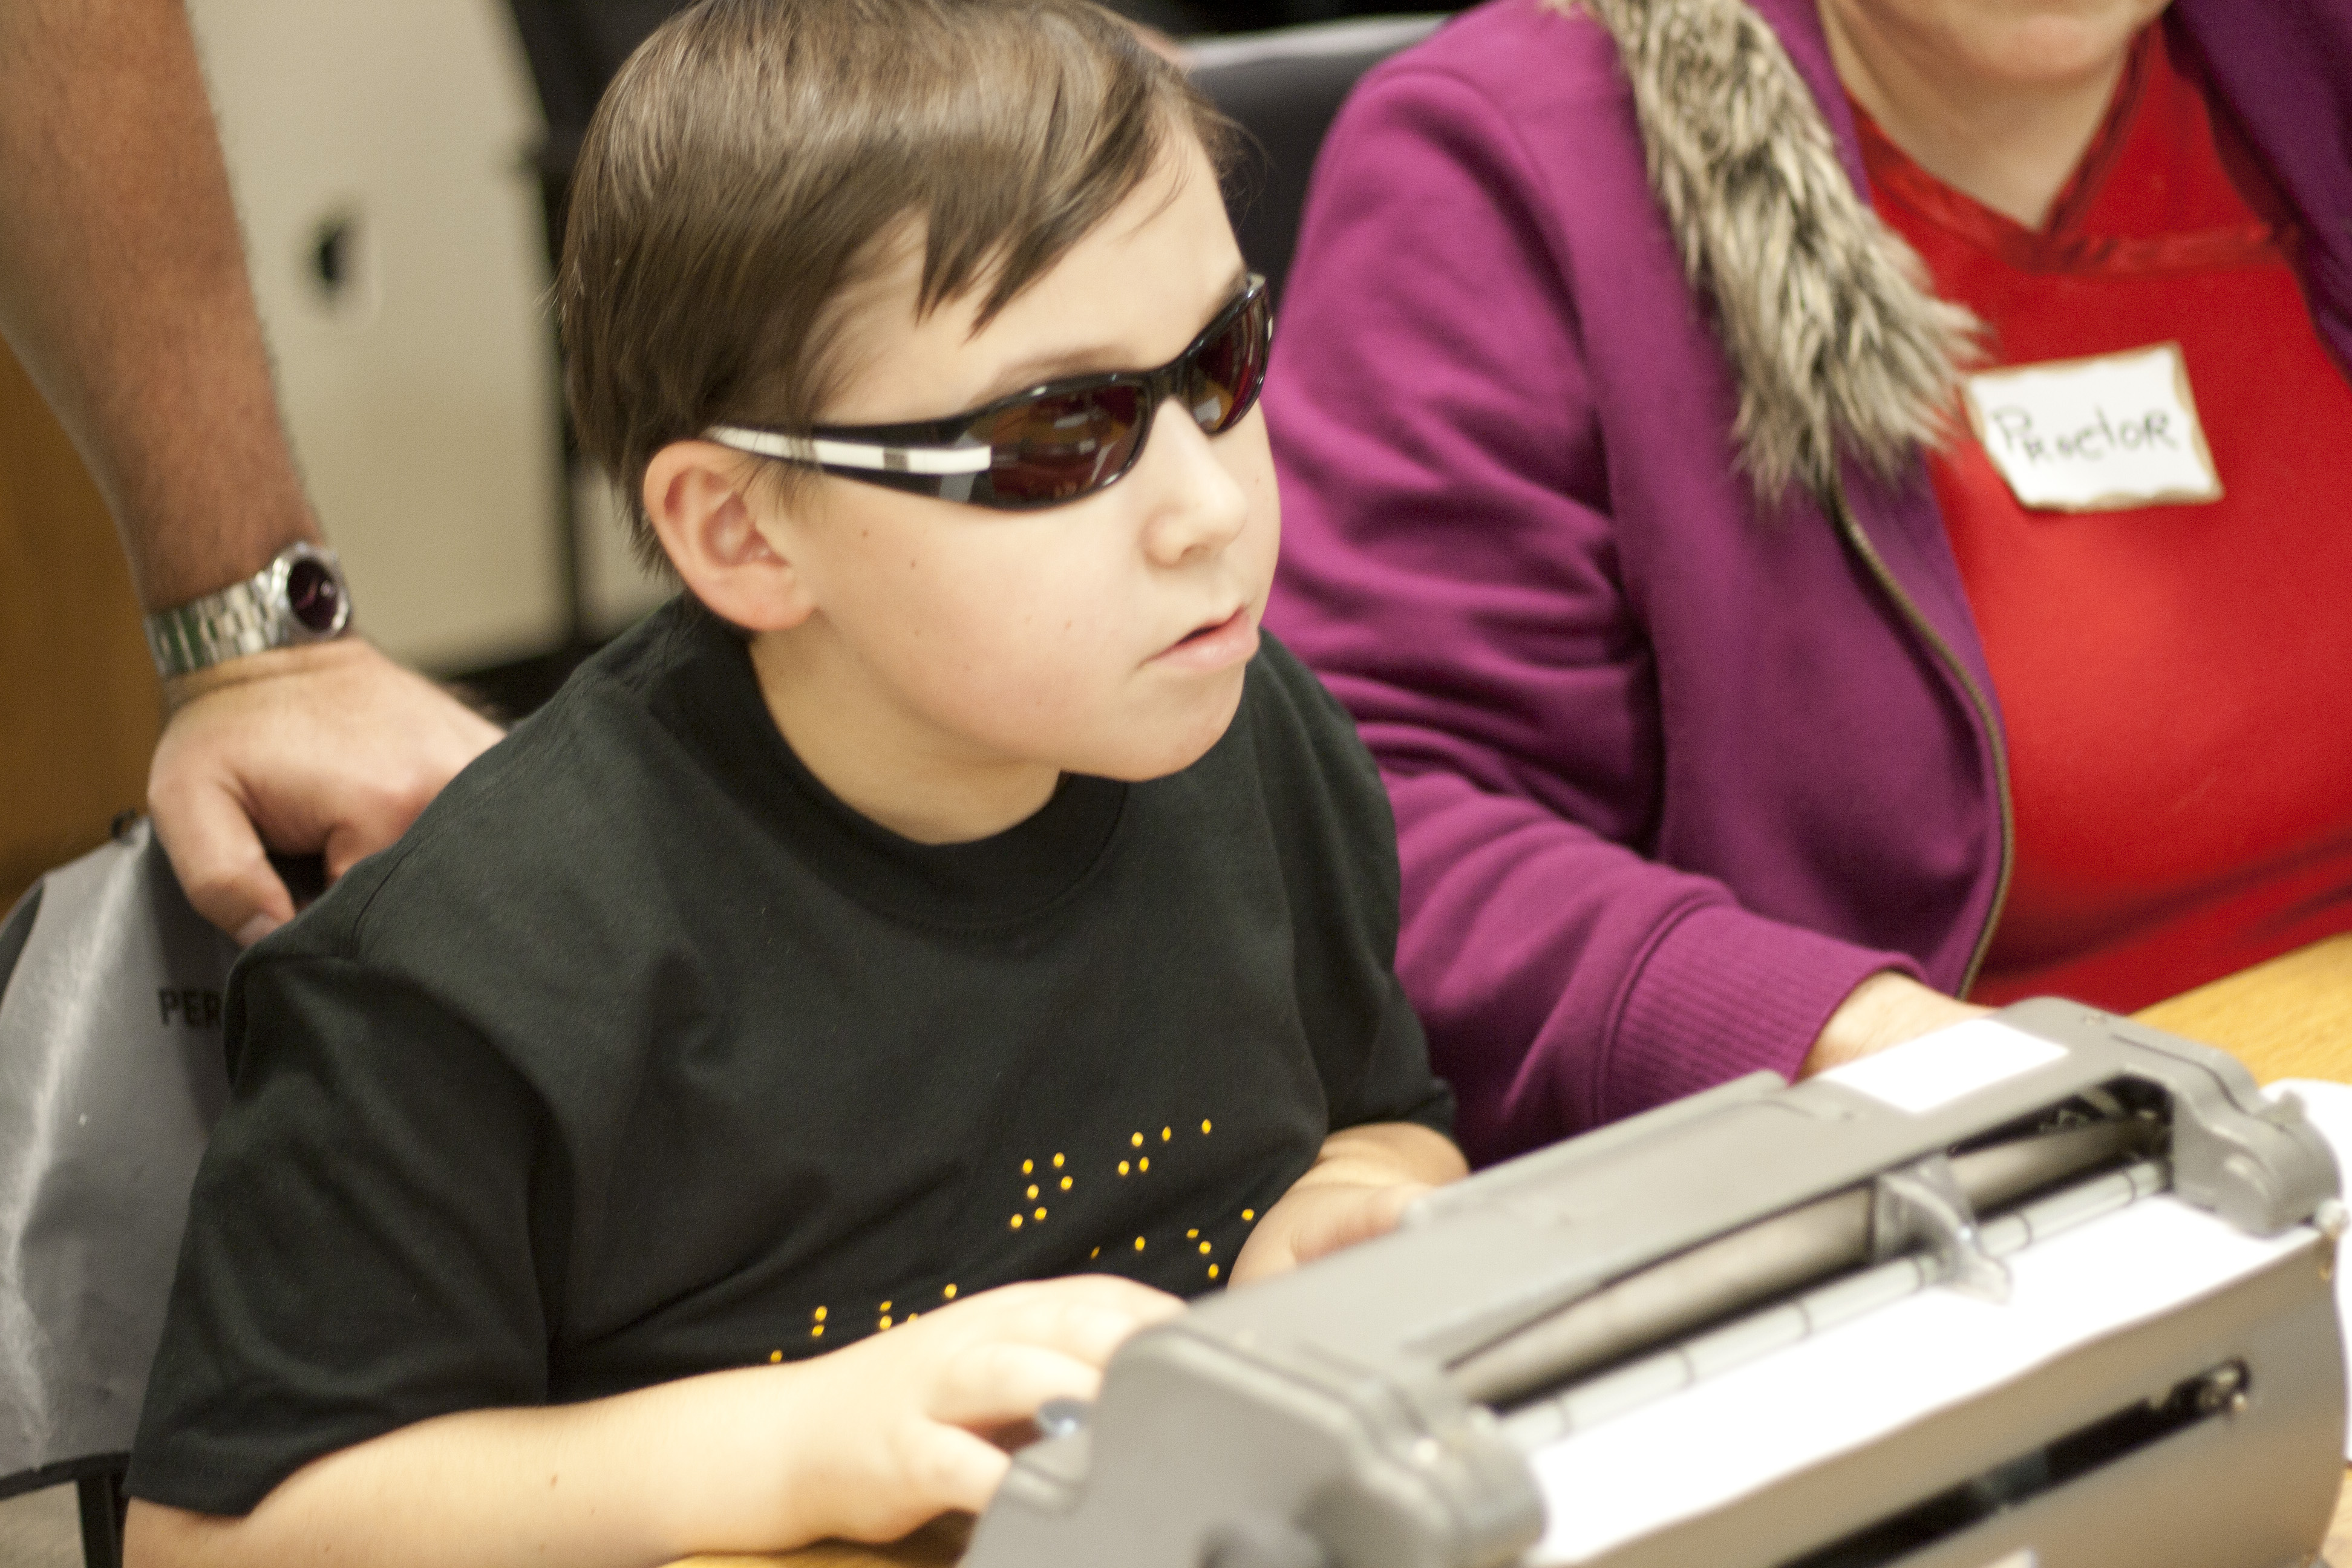 Young boy types diligently on a Perkins Brailler during the Braille Challenge